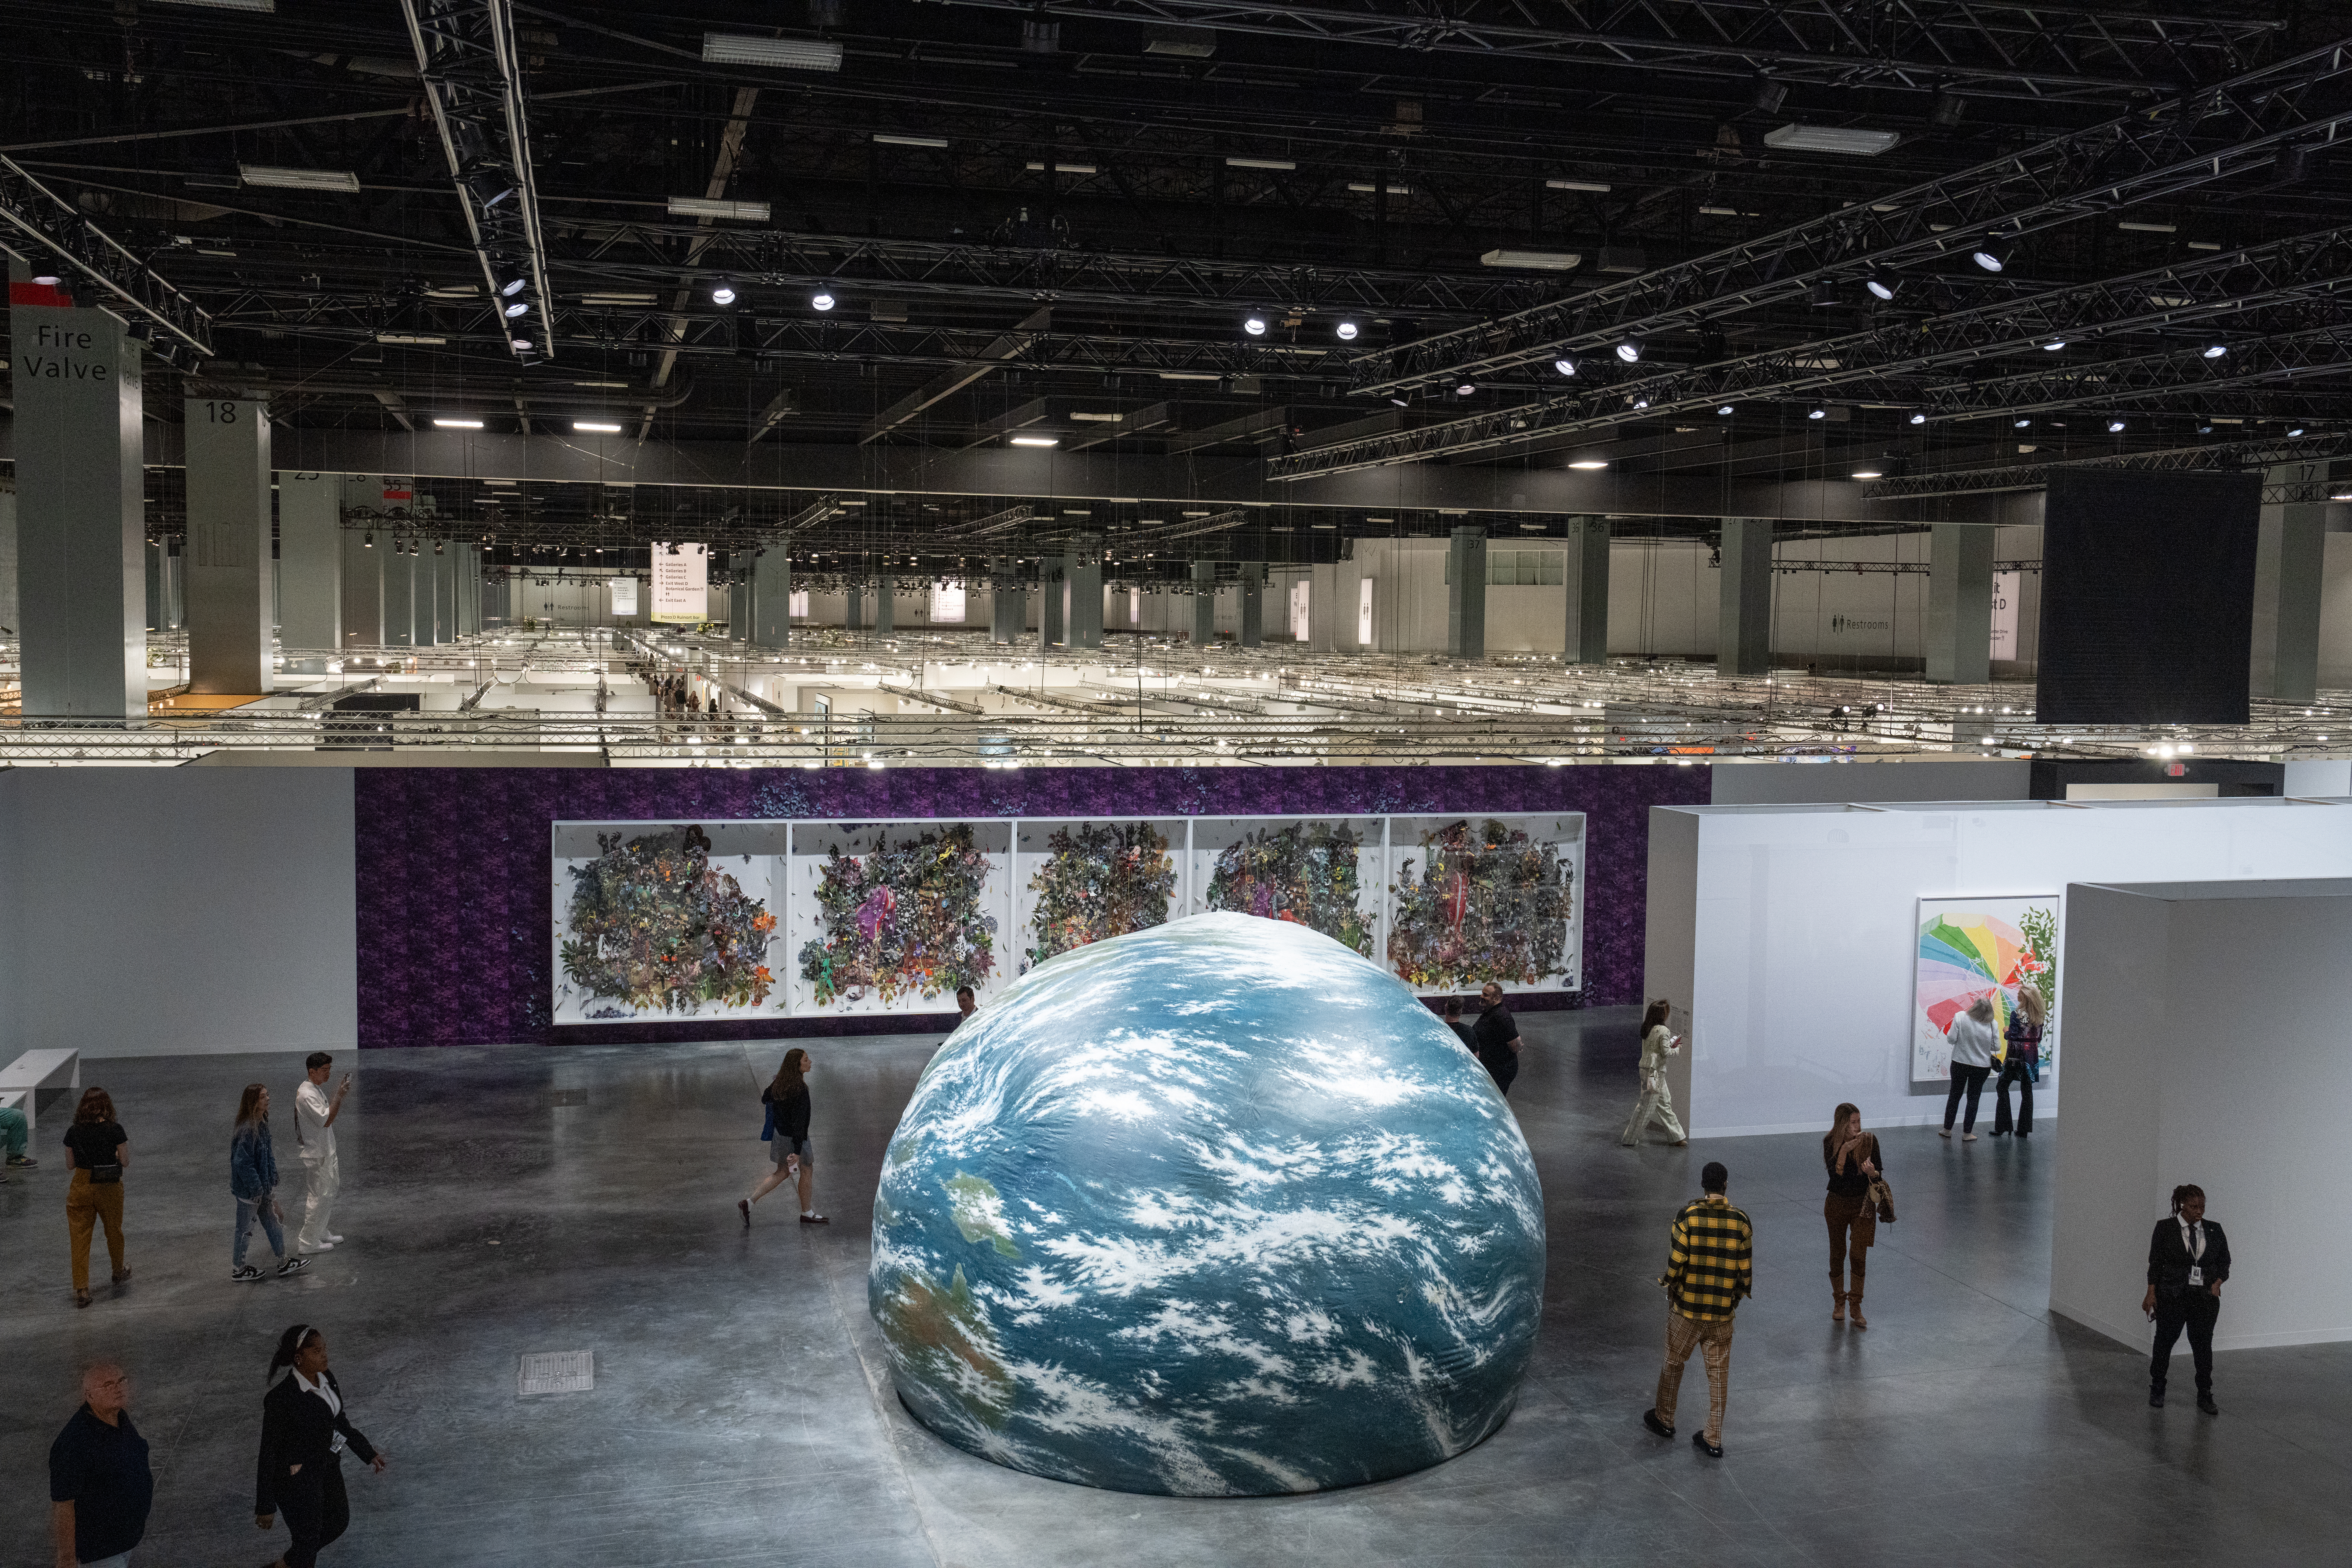 Large spherical sculpture of the earth at an art fair